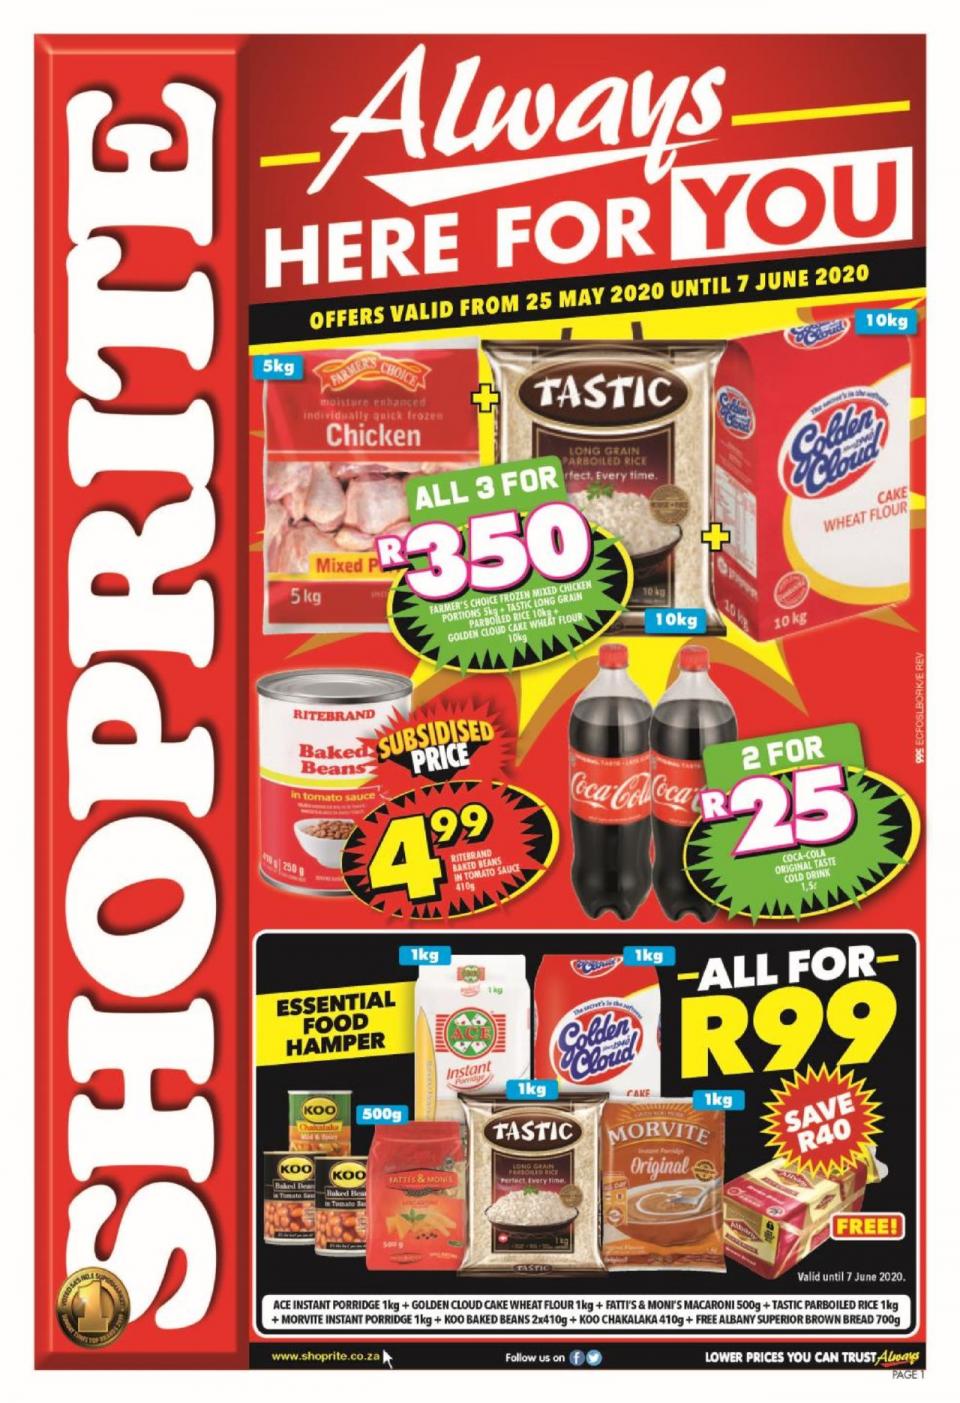 Shoprite Specials Always Here For You 25 May 2020